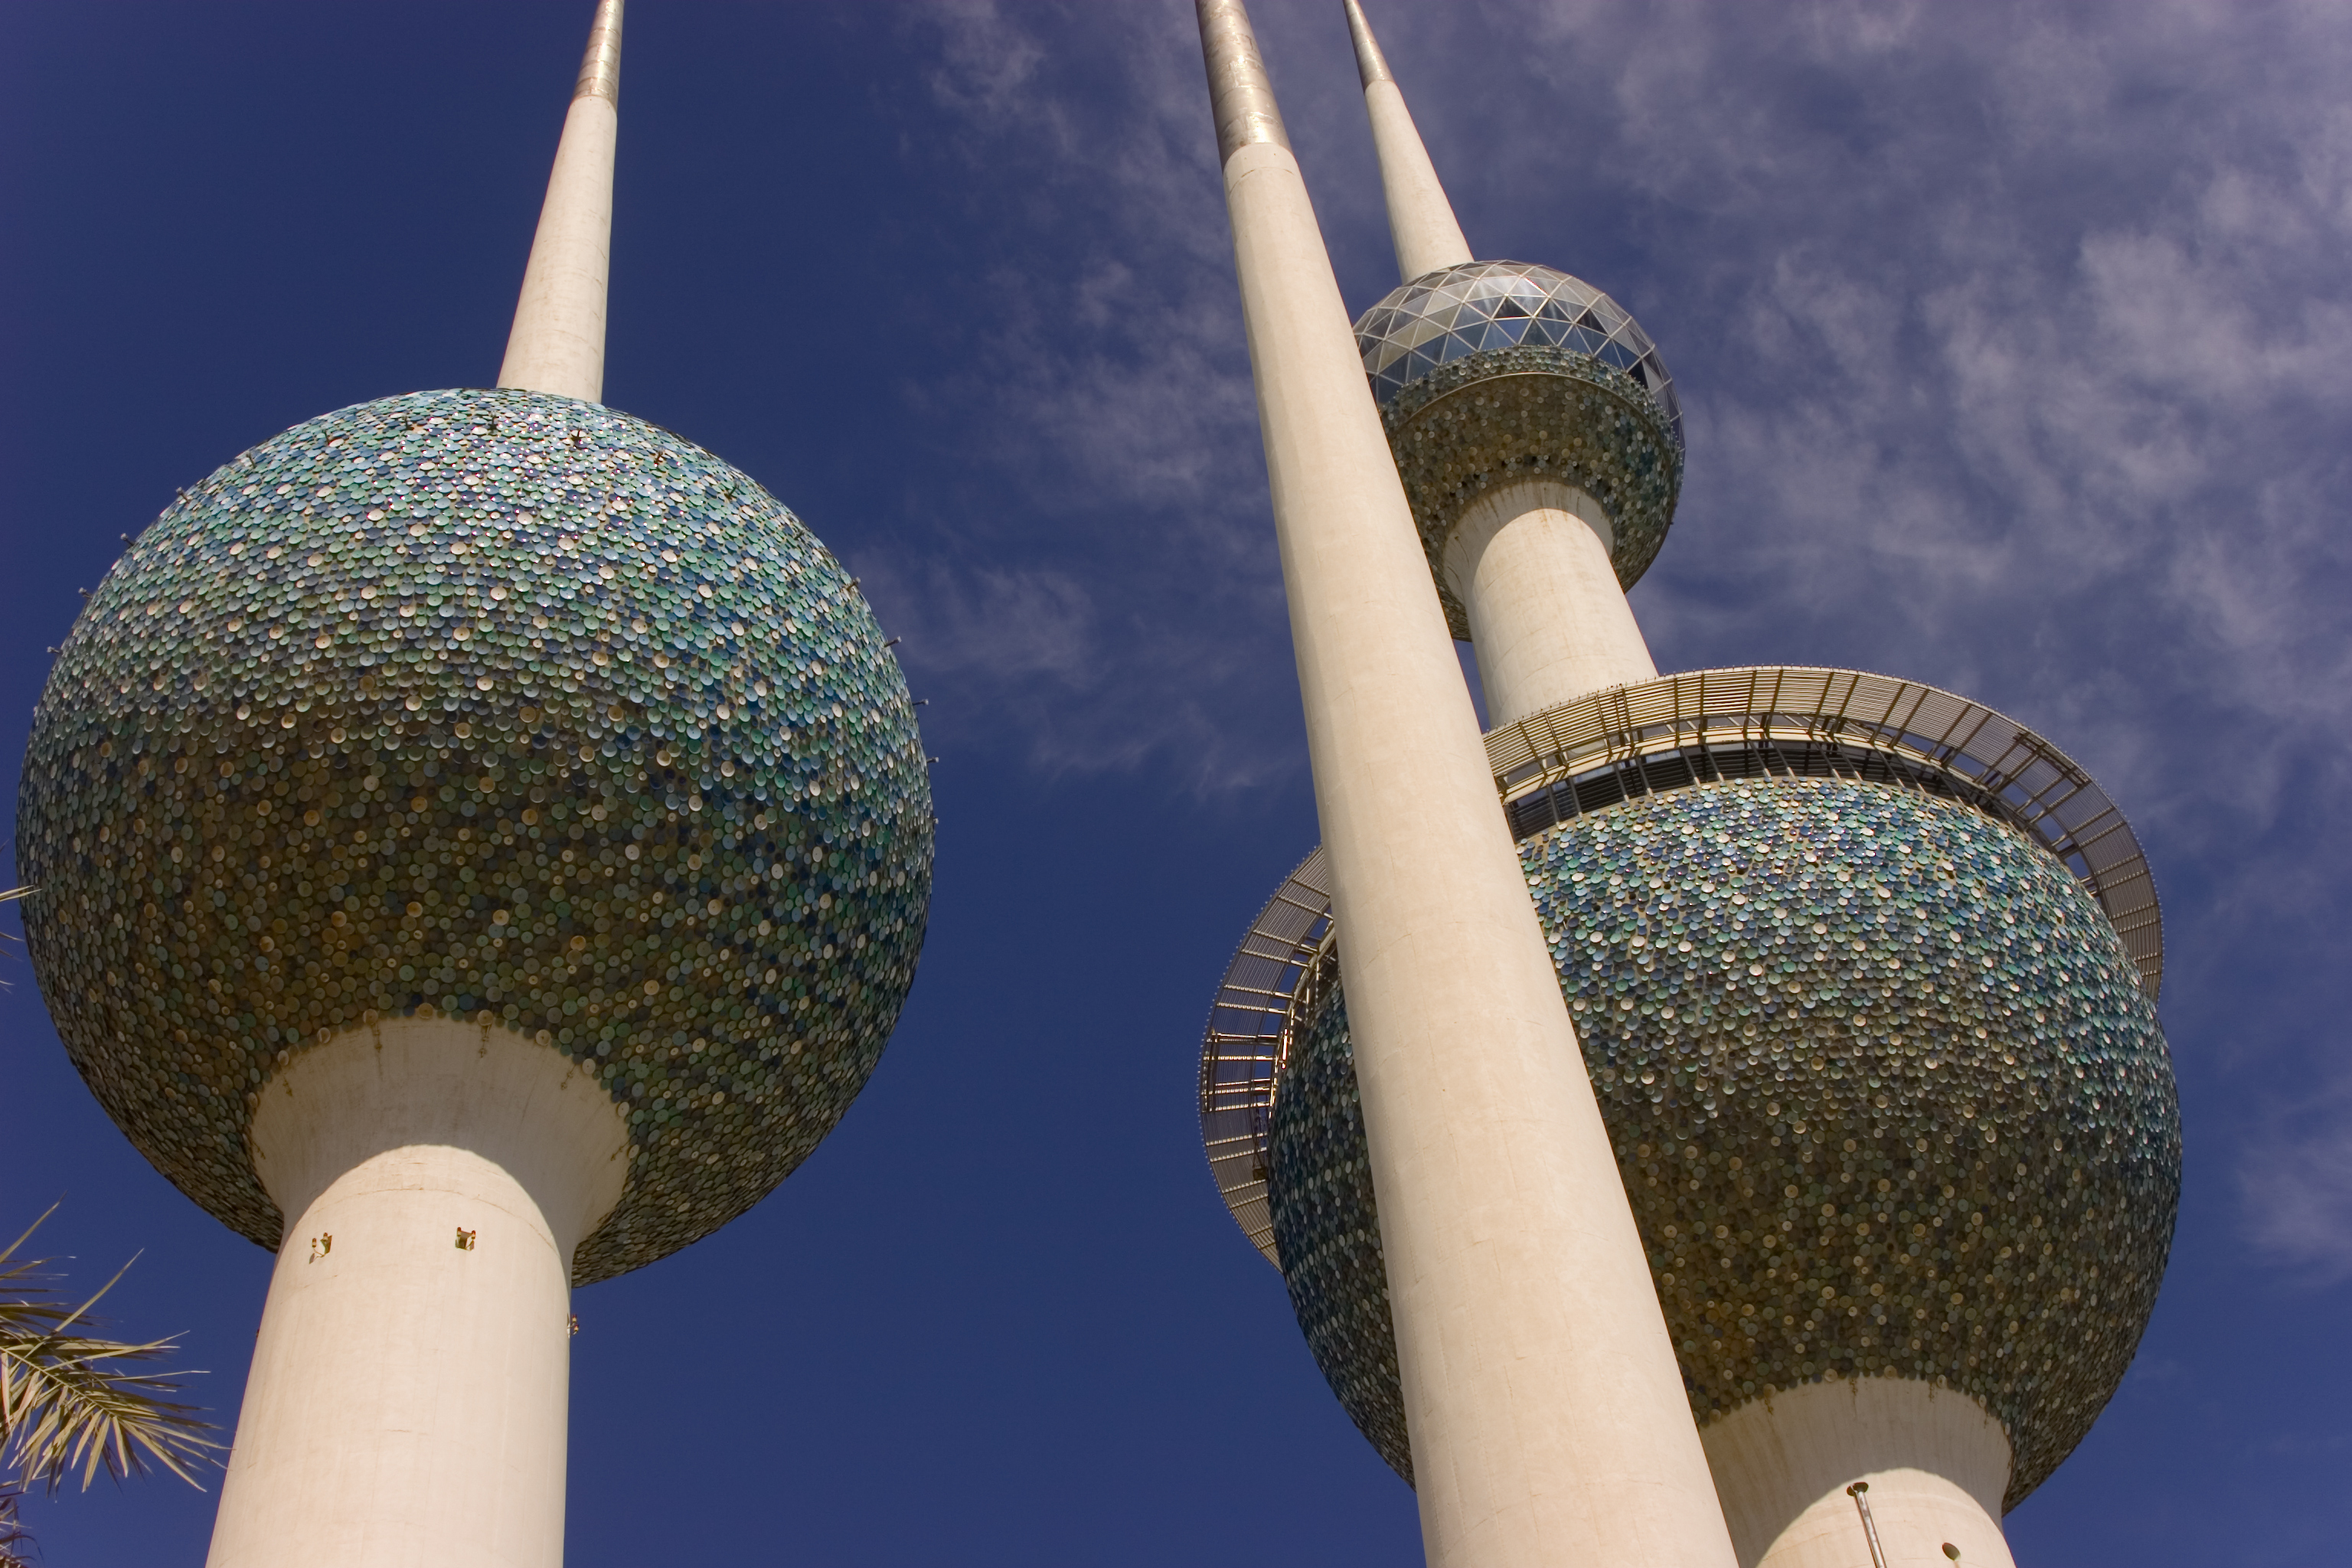 Updated ultimate beneficial ownership (UBO) regulations in Kuwait